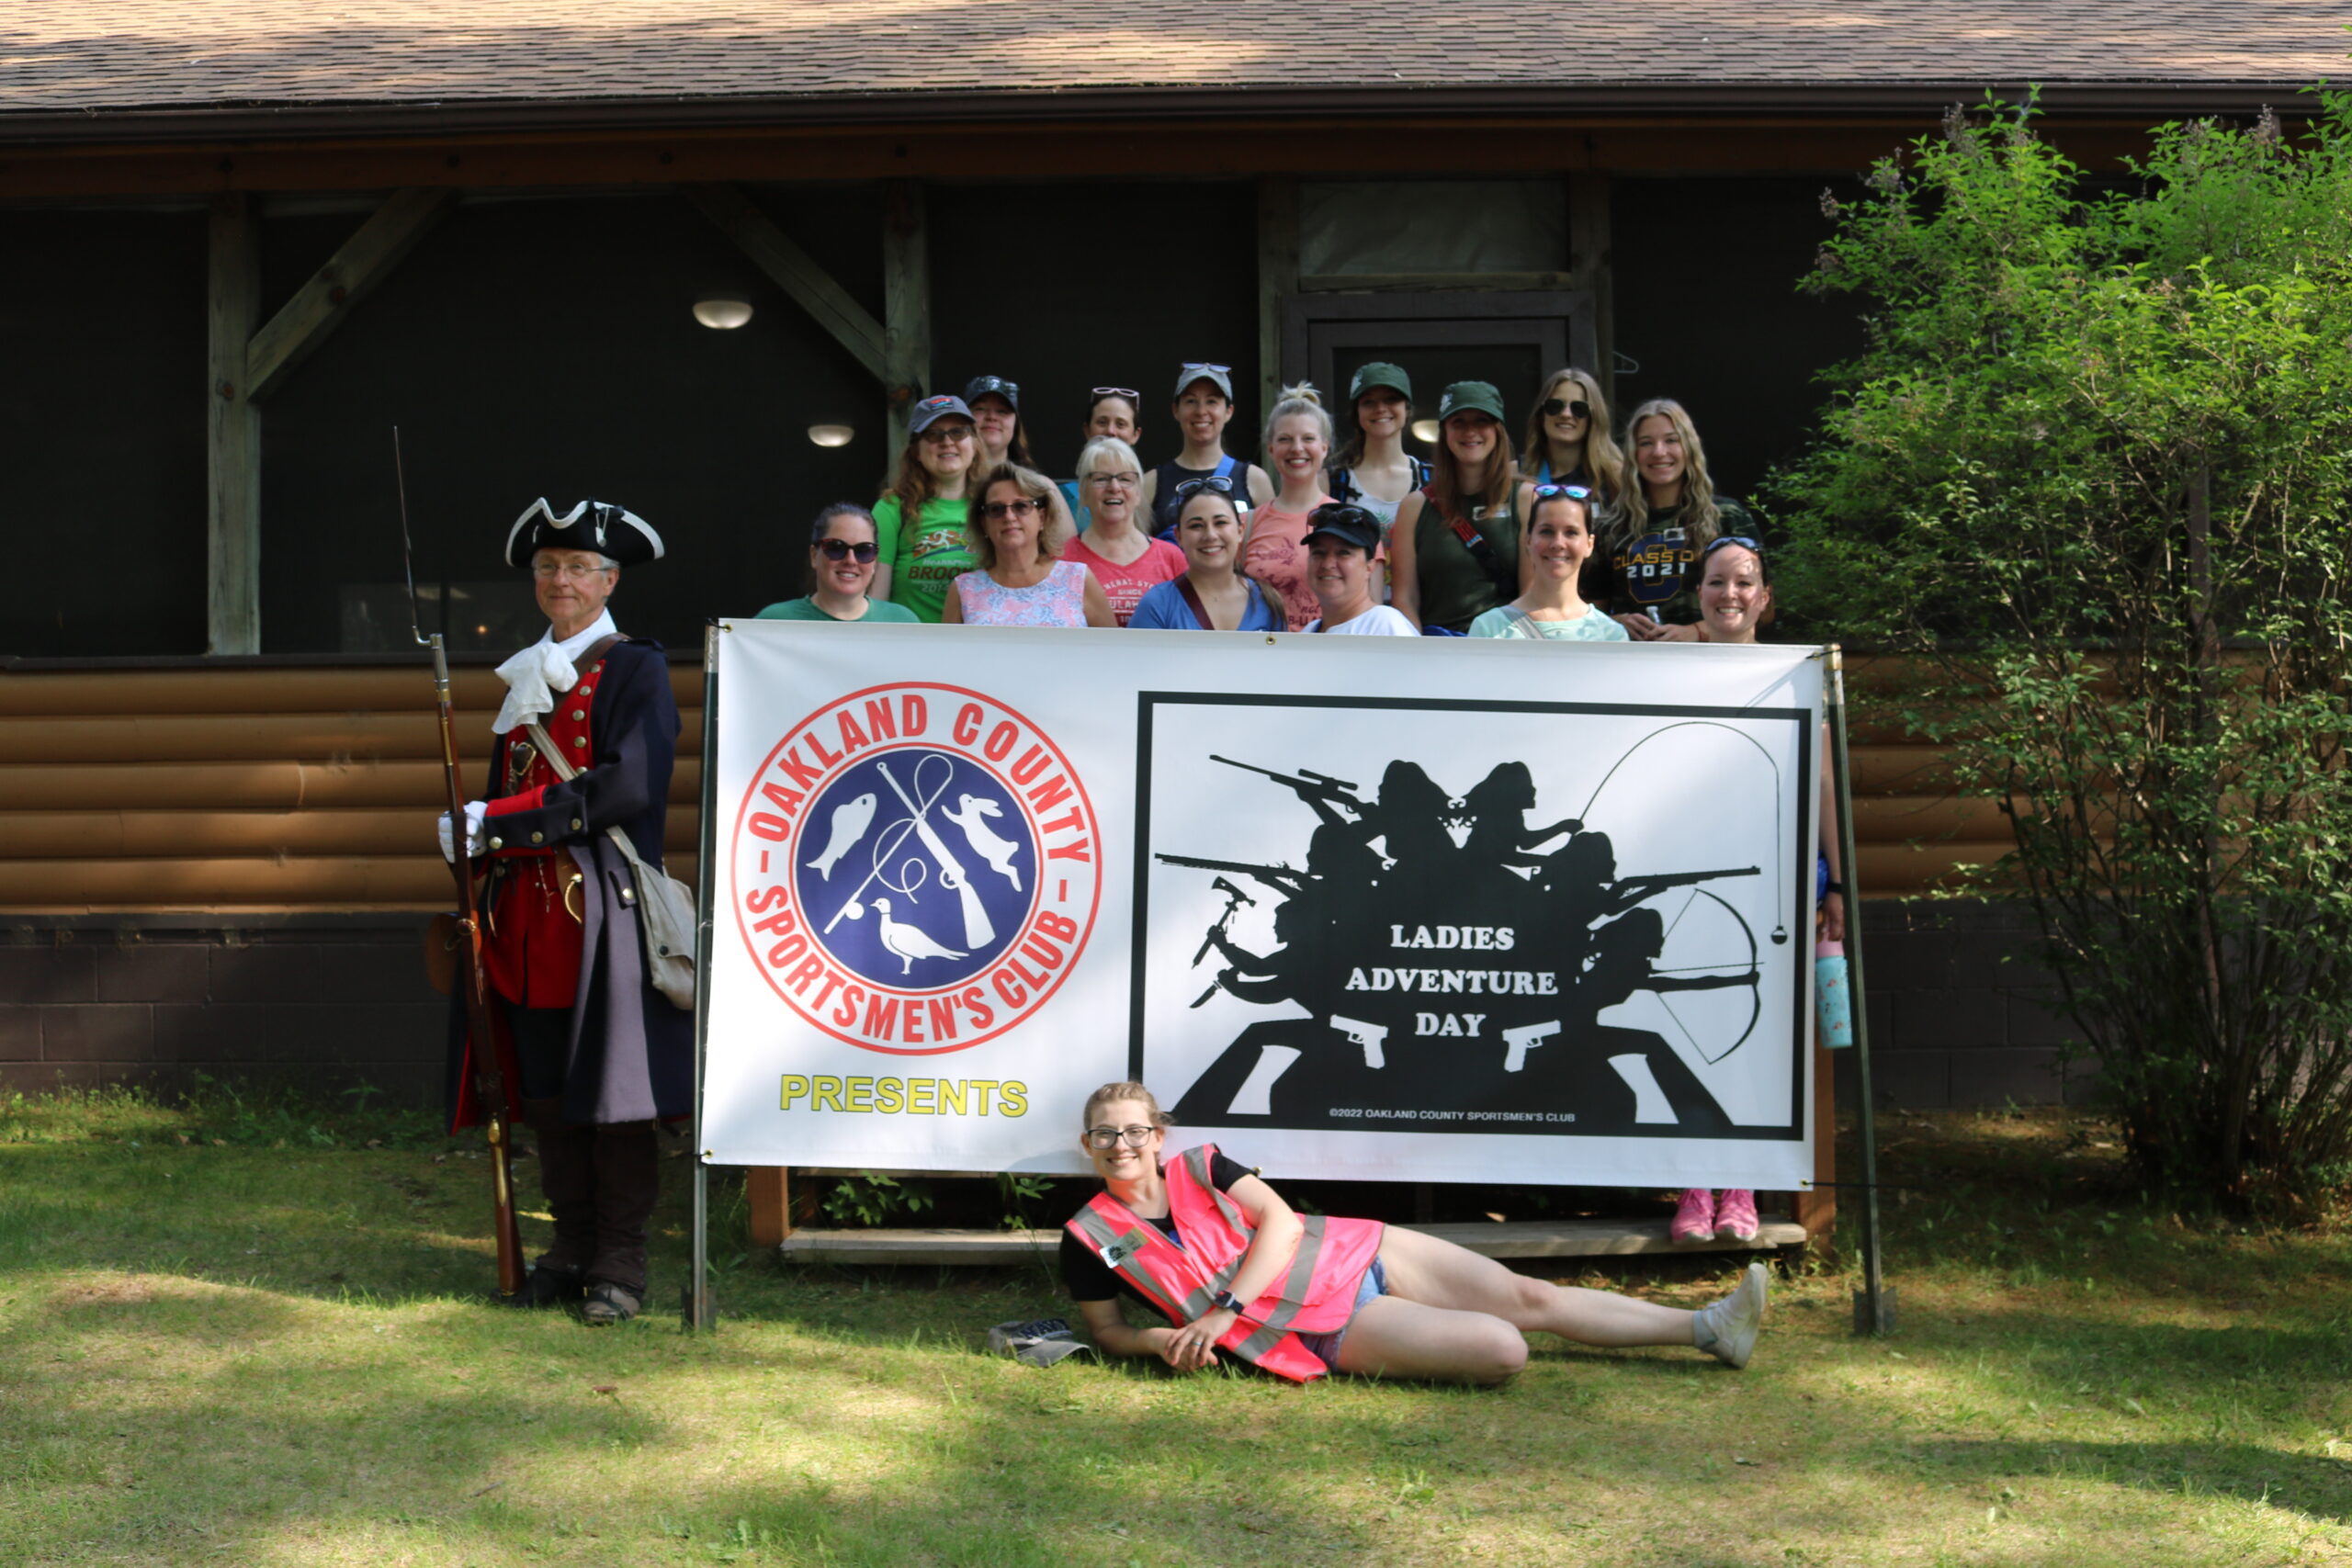 Participants and volunteers pose with the Ladies Adventure Day Banner.